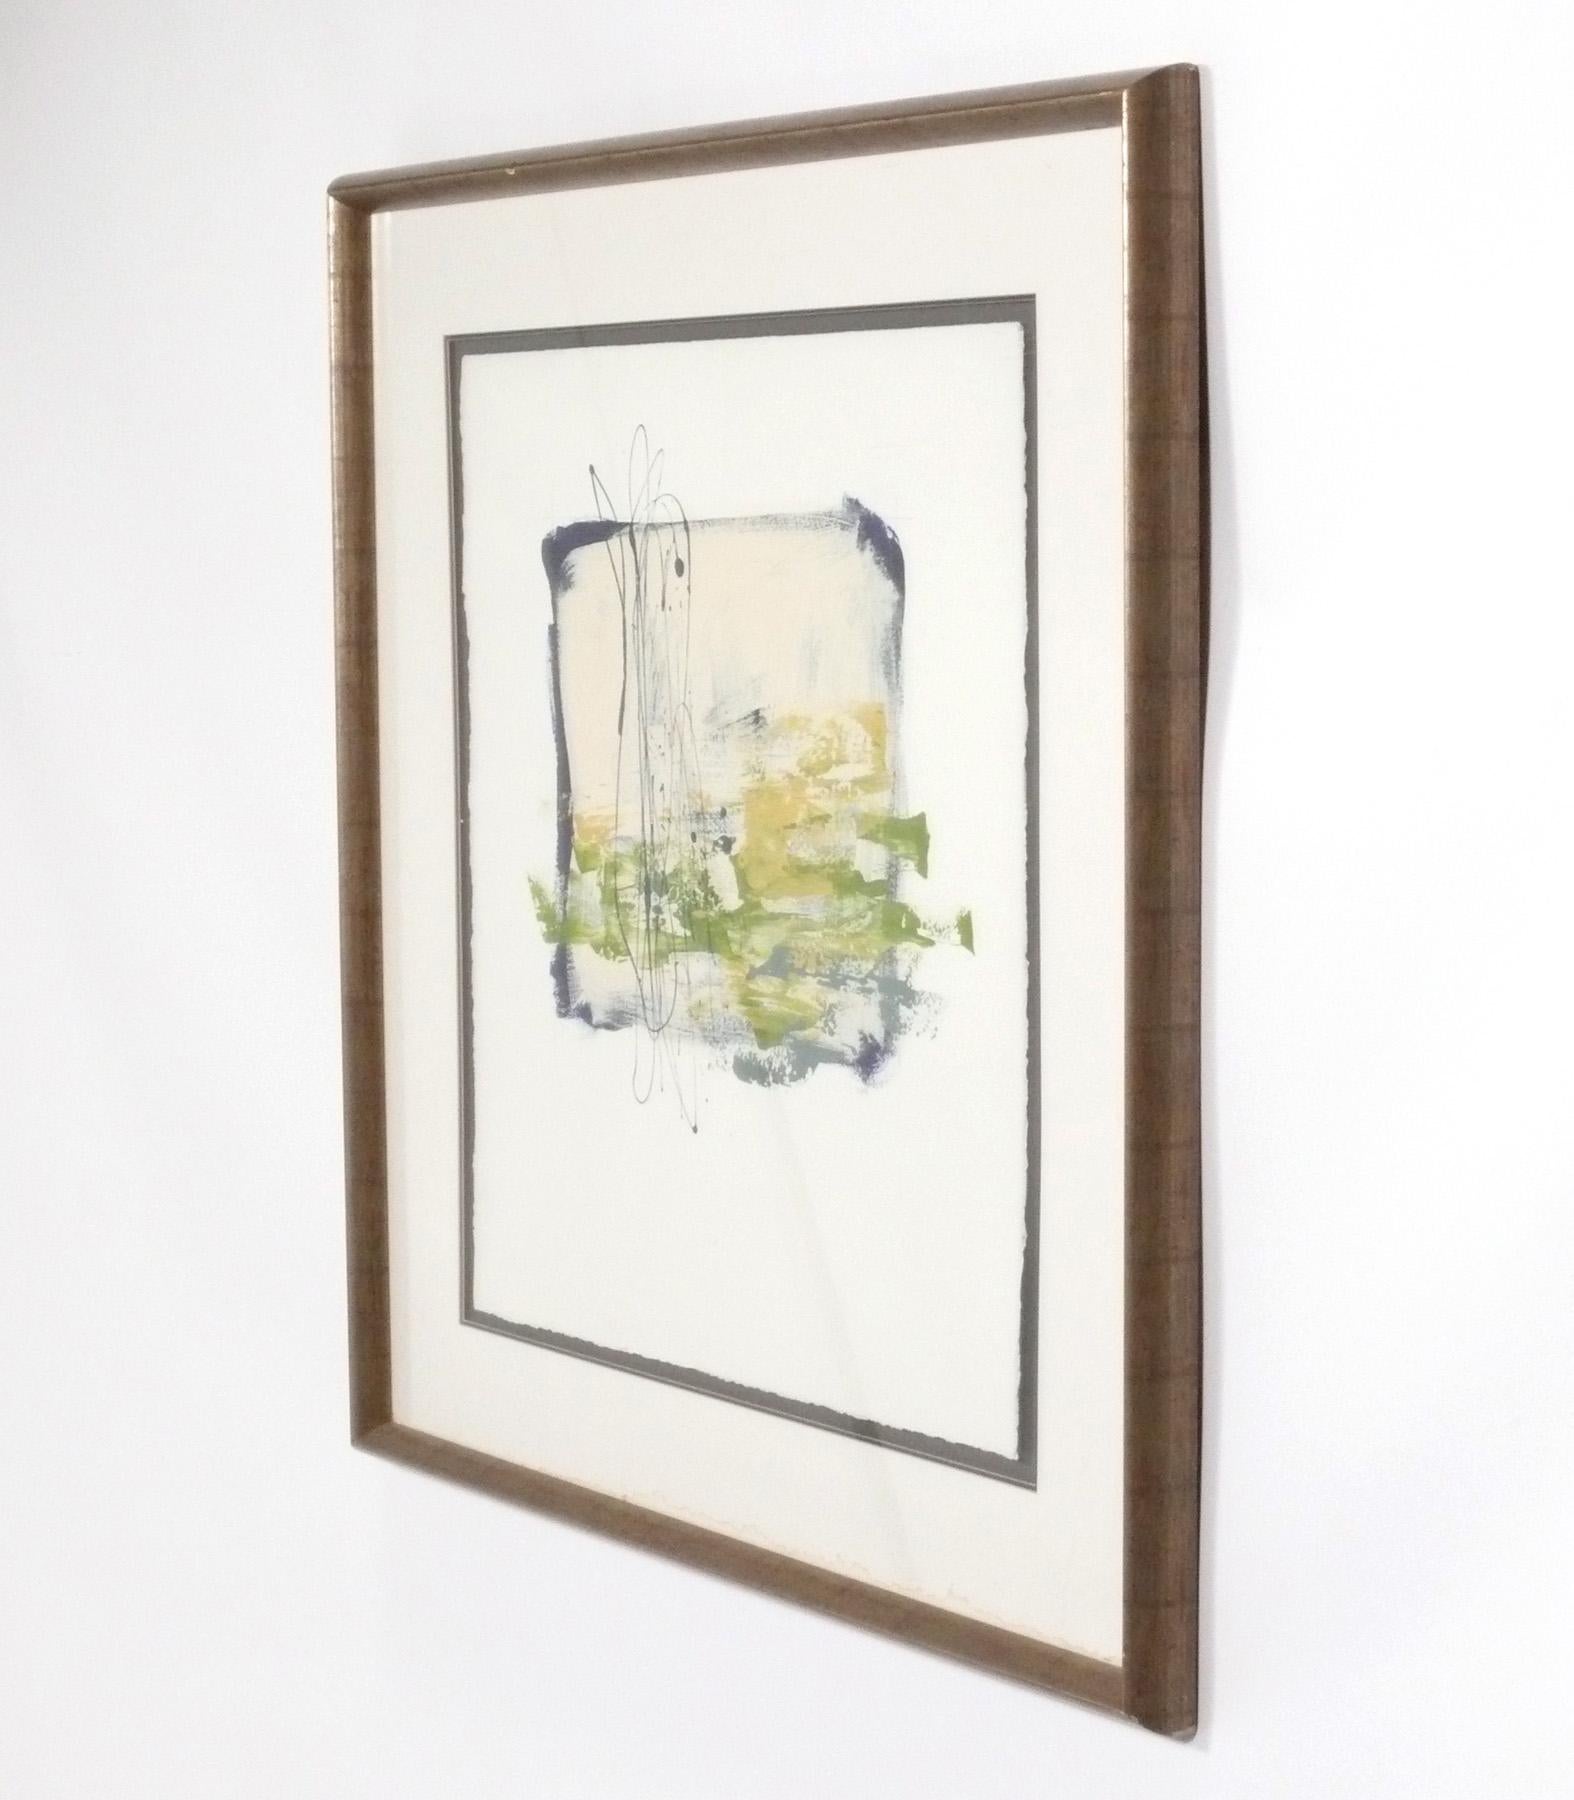 Contemporary abstract painting, American, circa 2000s. Beautiful abstract painting in shades of blues and greens, framed in a silvered wooden frame.